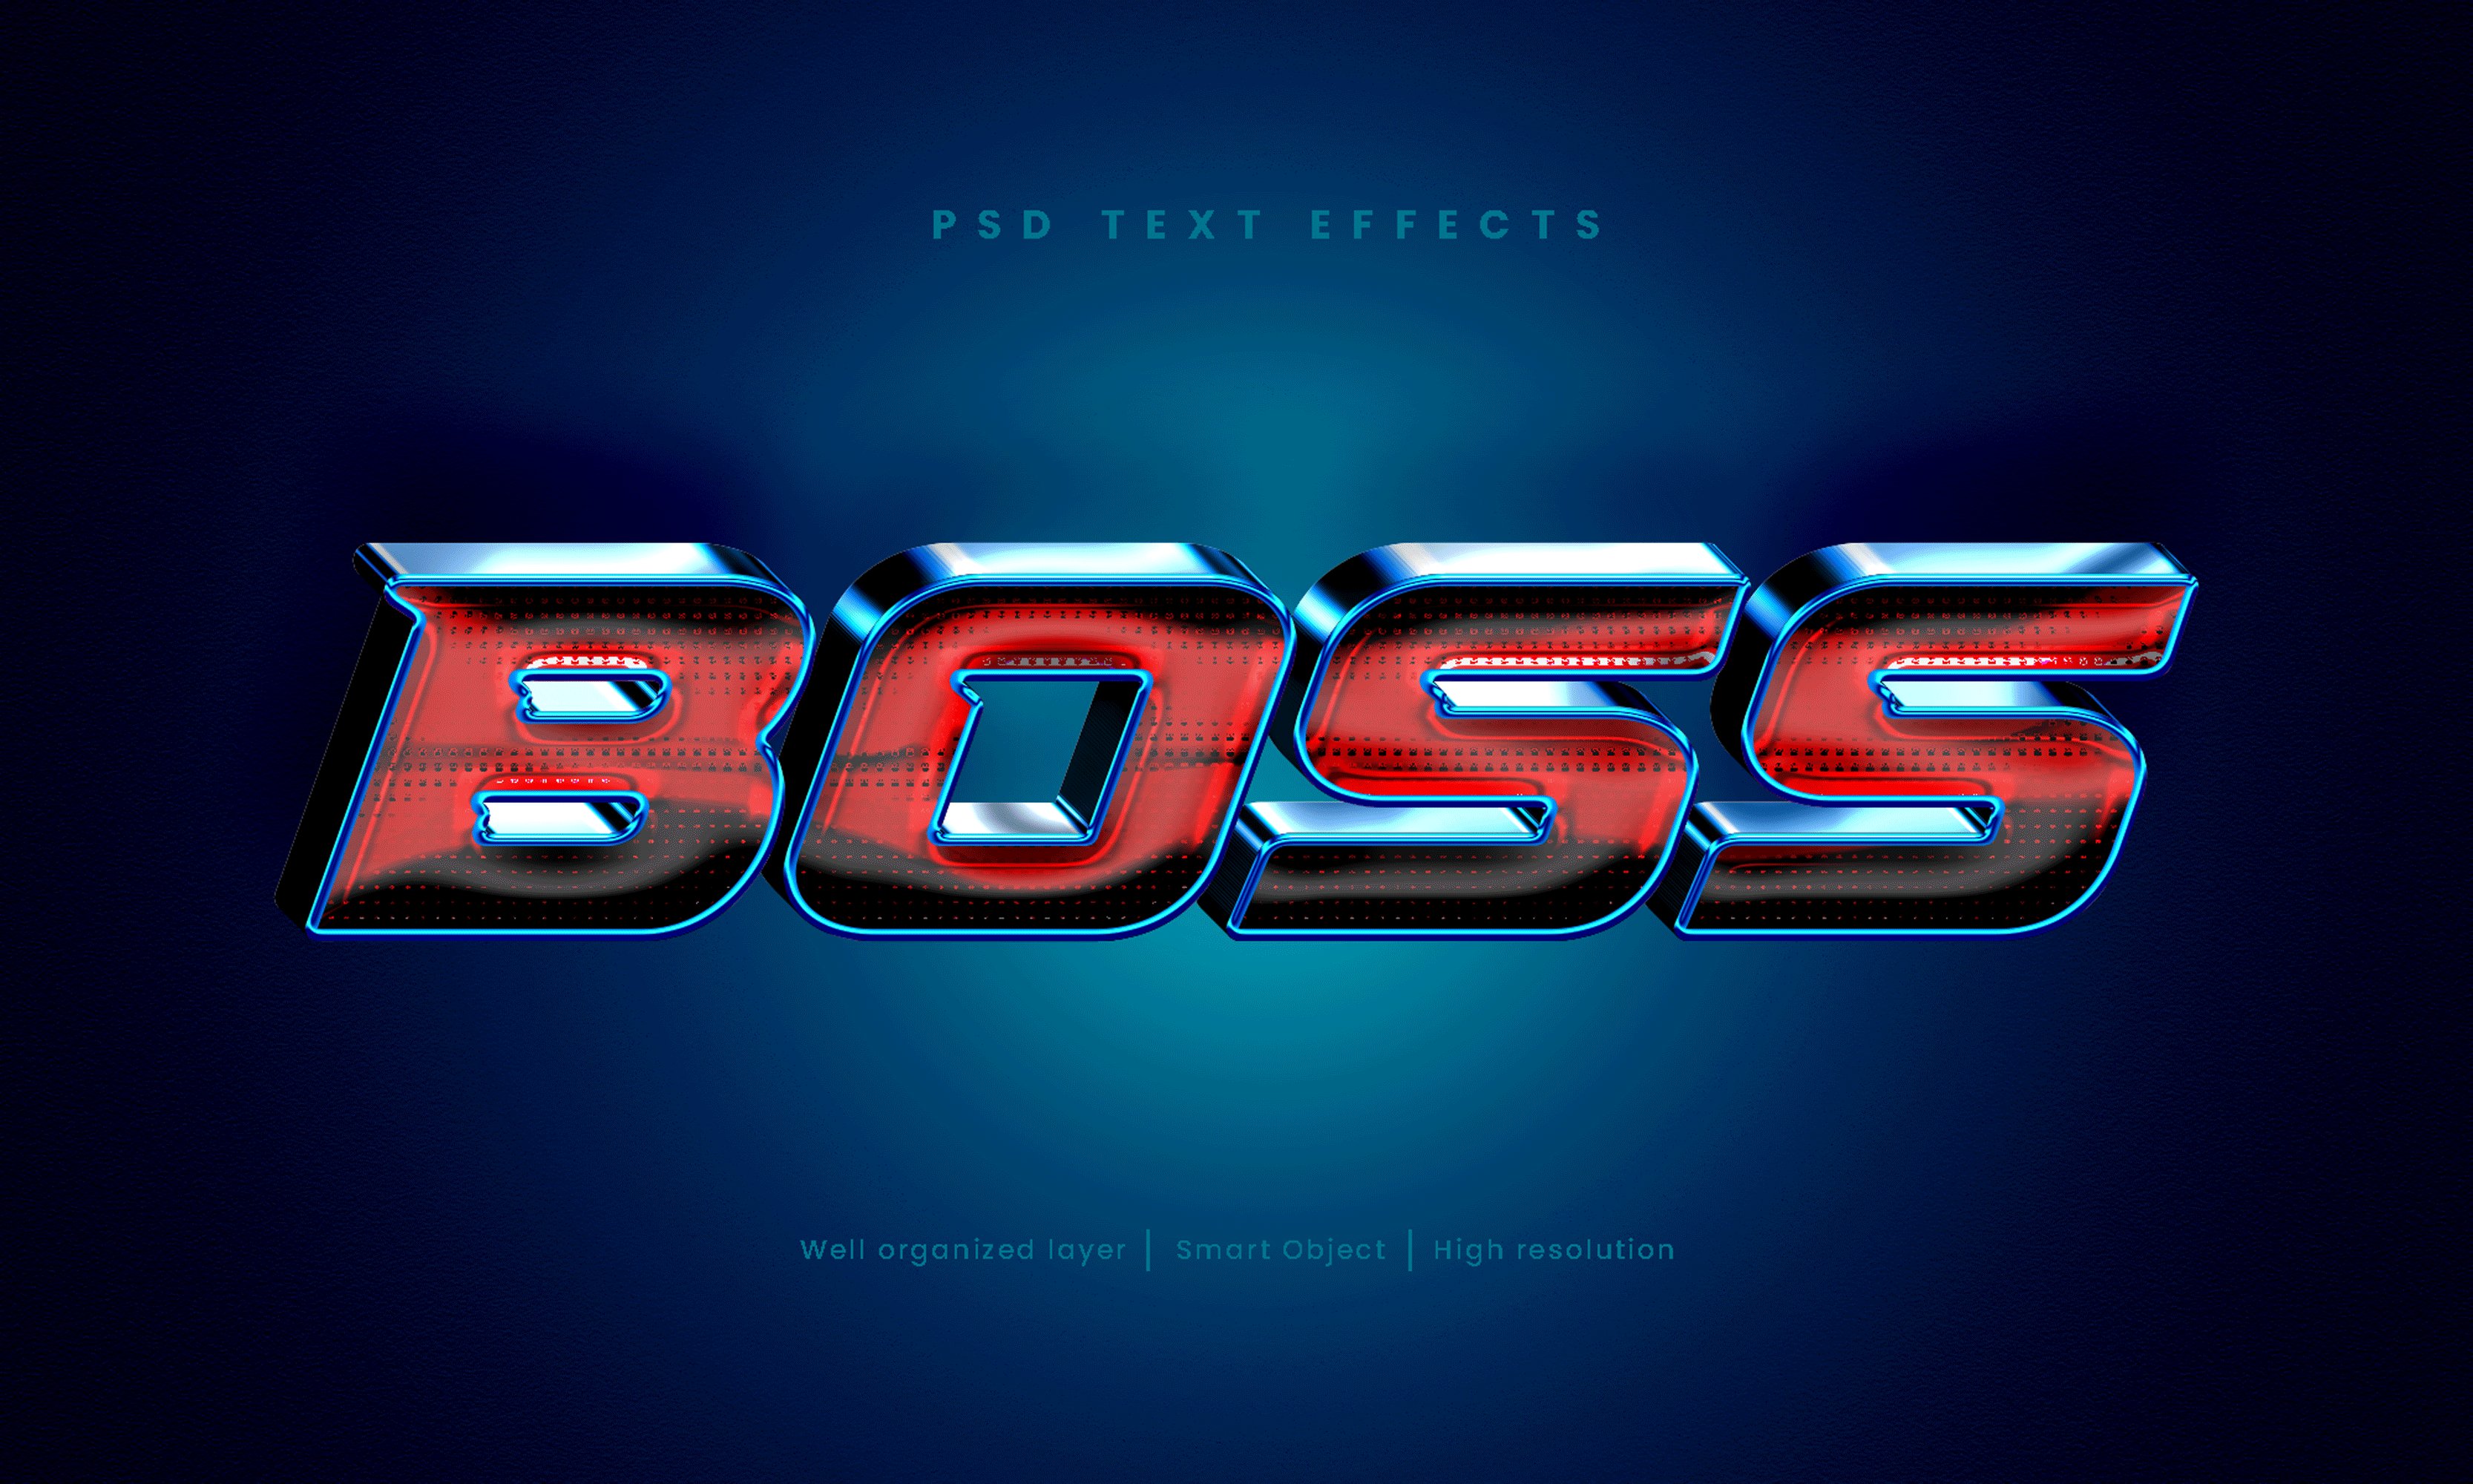 Boss Editable text effect PSDcover image.